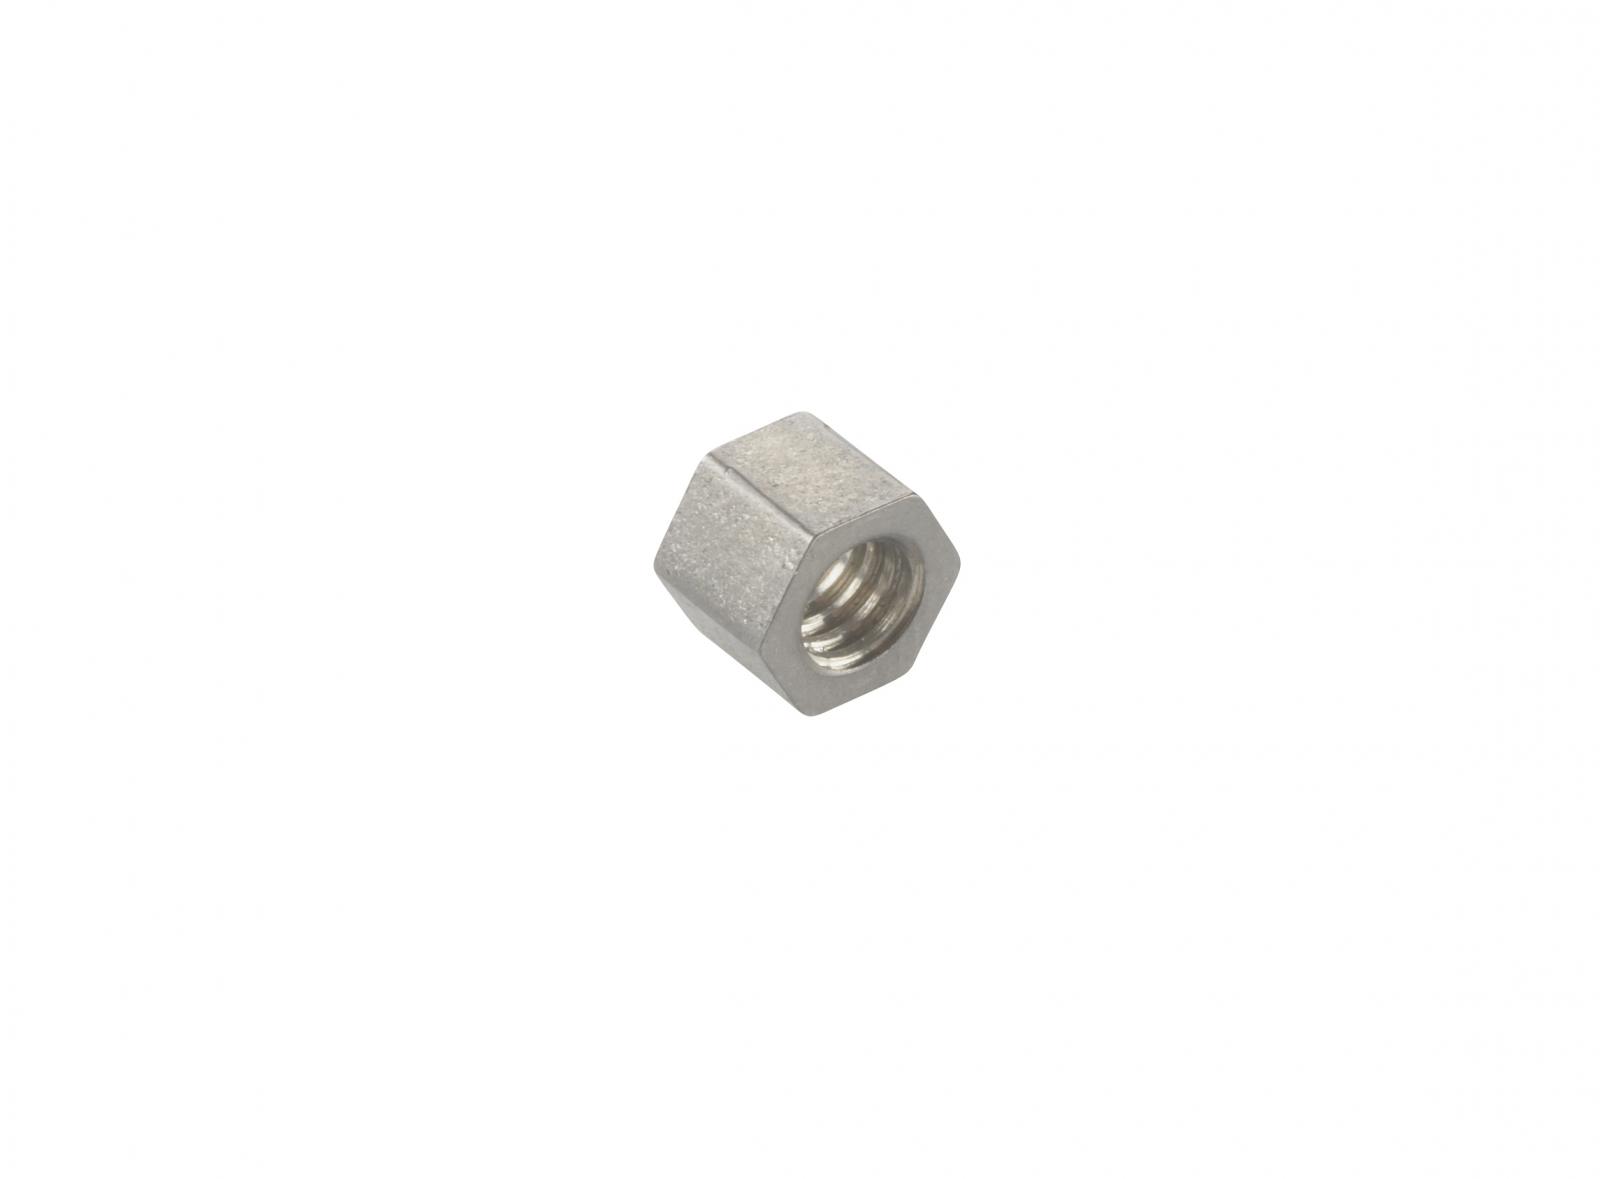 TapeTech® Long Nut. Part number 159026